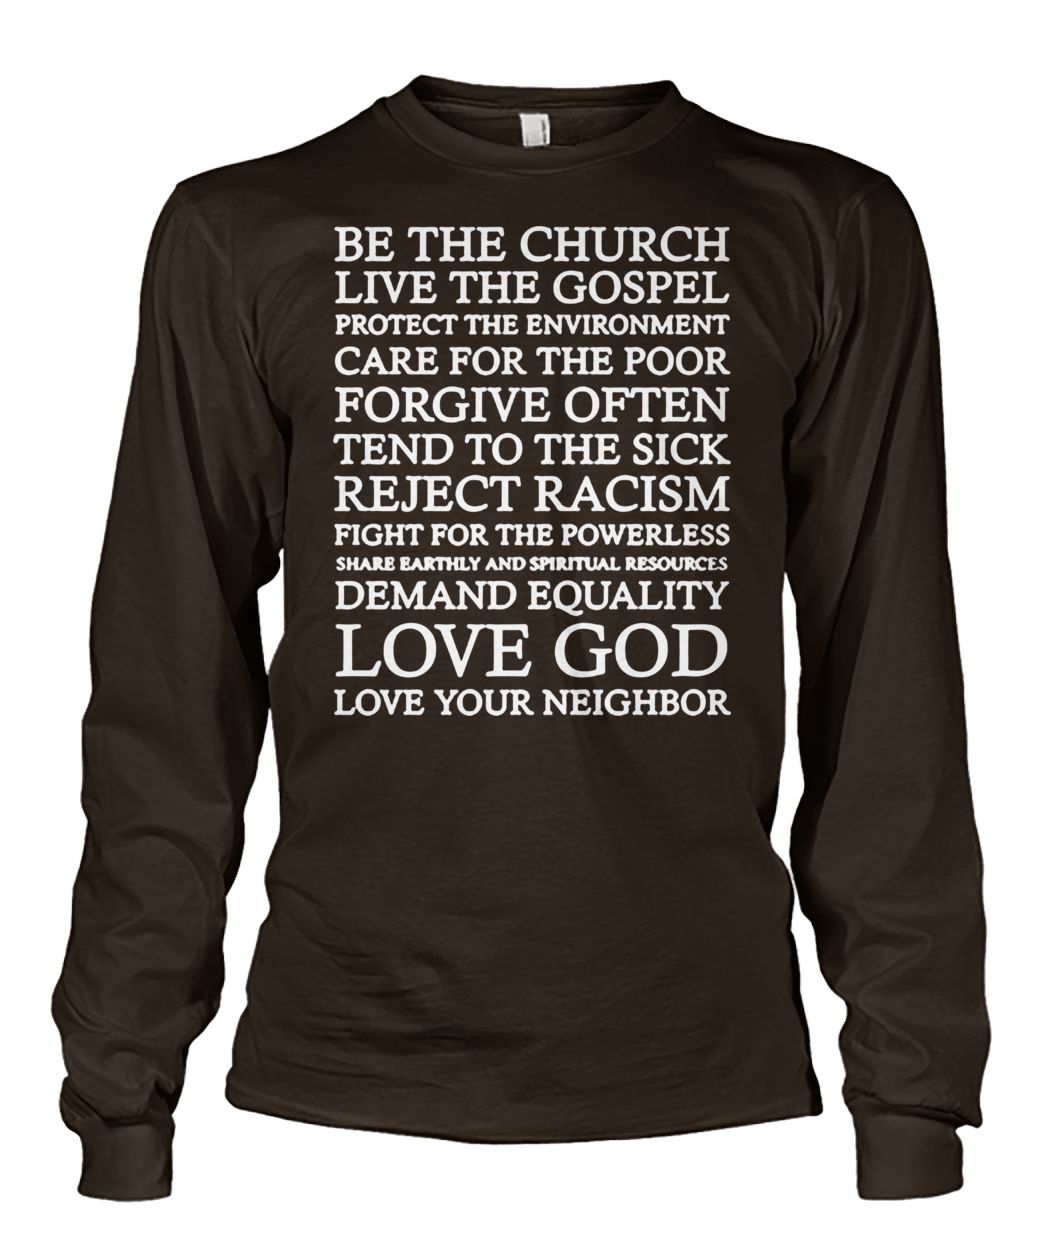 Be the church live the gospel protect the enviroment unisex long sleeve